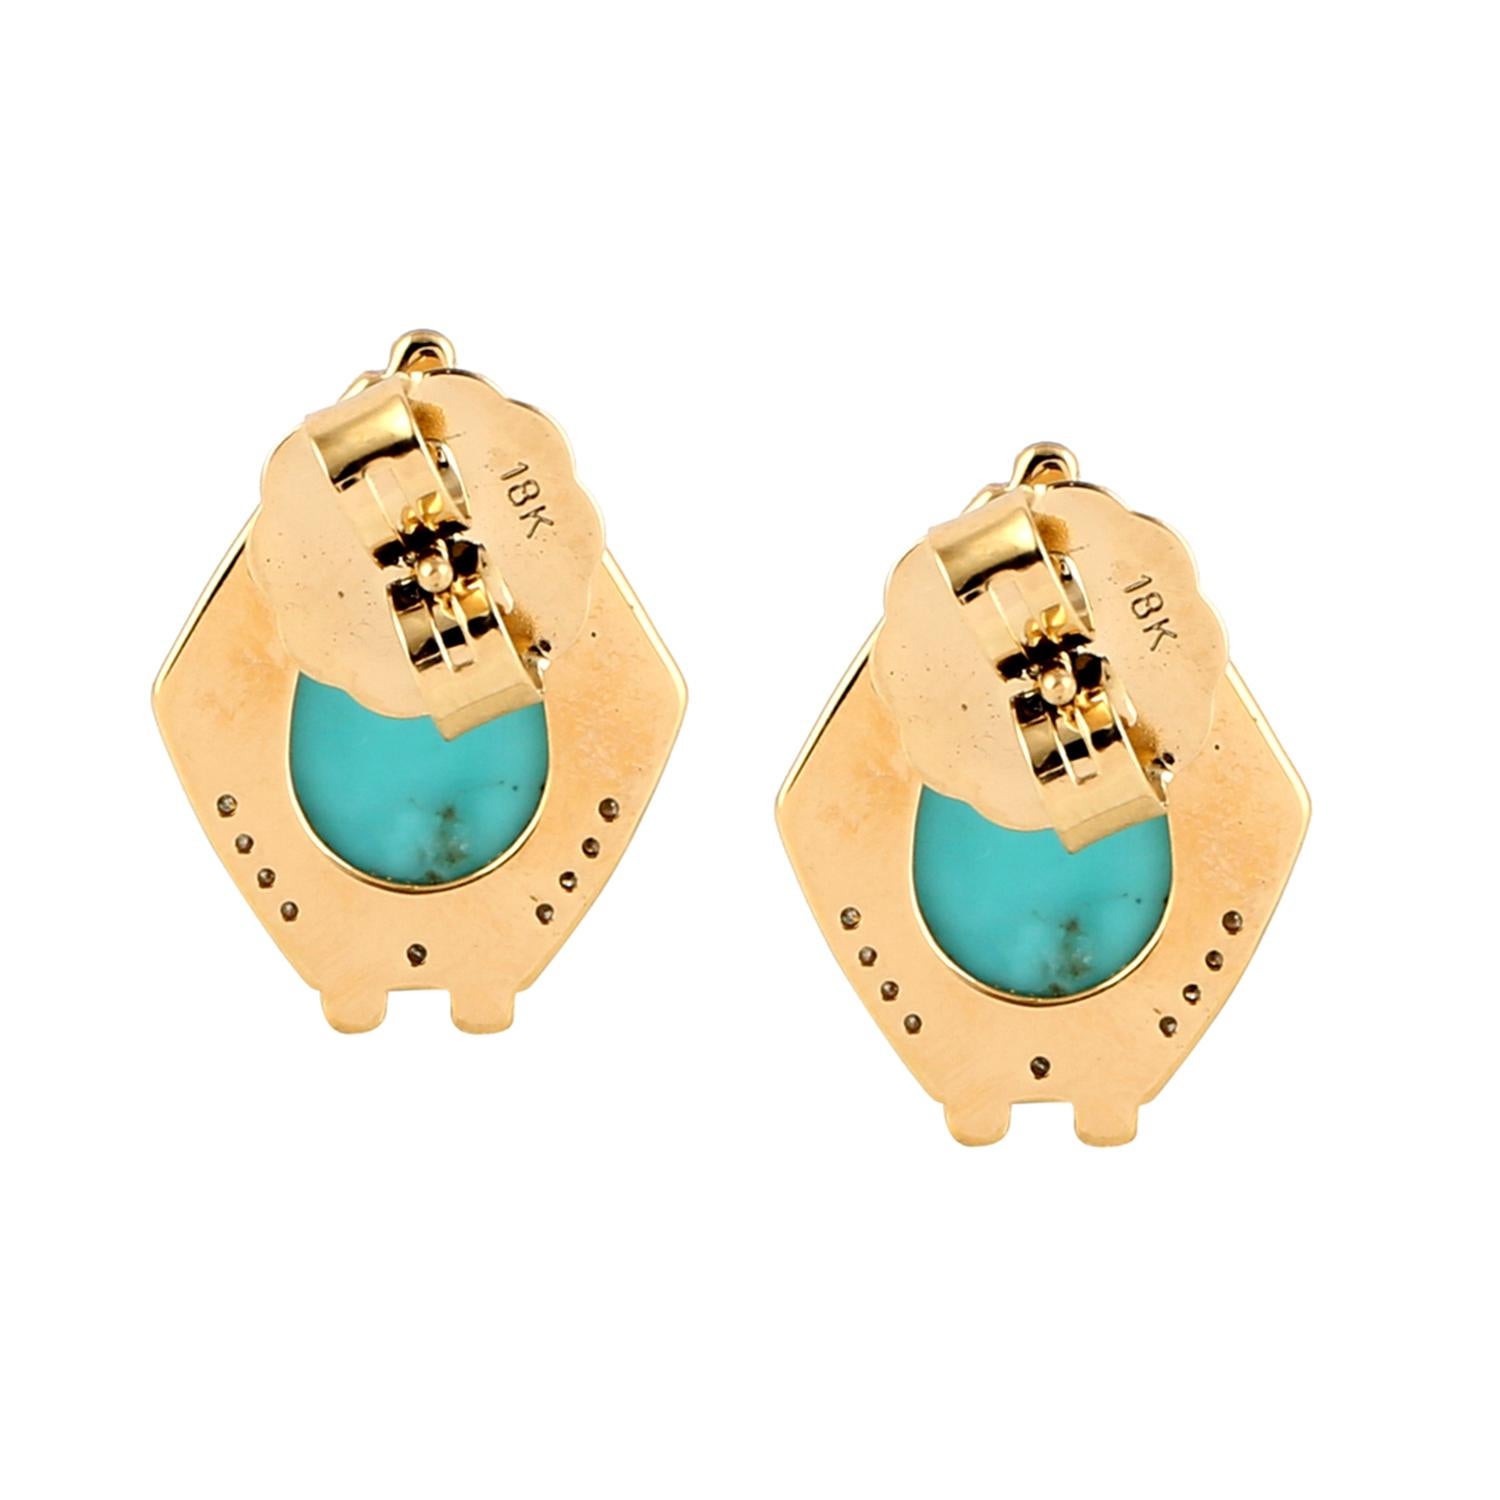 Handcrafted from 14-karat gold, these beautiful stud earrings are set with 6.24 carats turquoise, 
.22 carats of sparkling diamonds.

FOLLOW  MEGHNA JEWELS storefront to view the latest collection & exclusive pieces.  Meghna Jewels is proudly rated